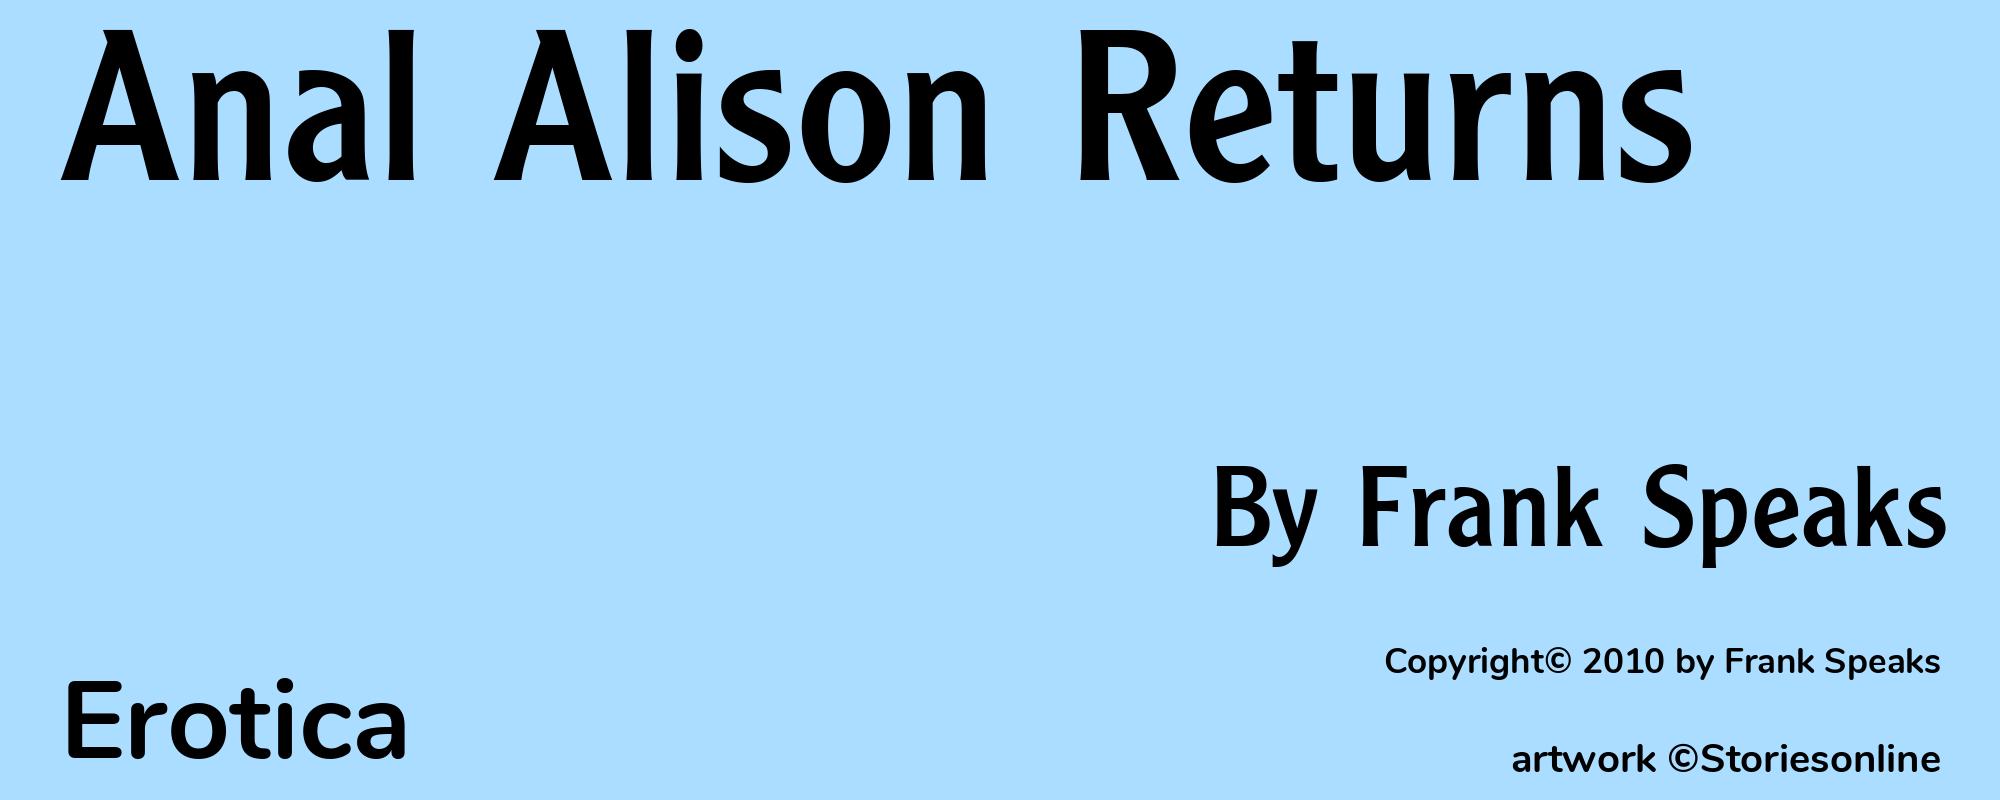 Anal Alison Returns - Cover